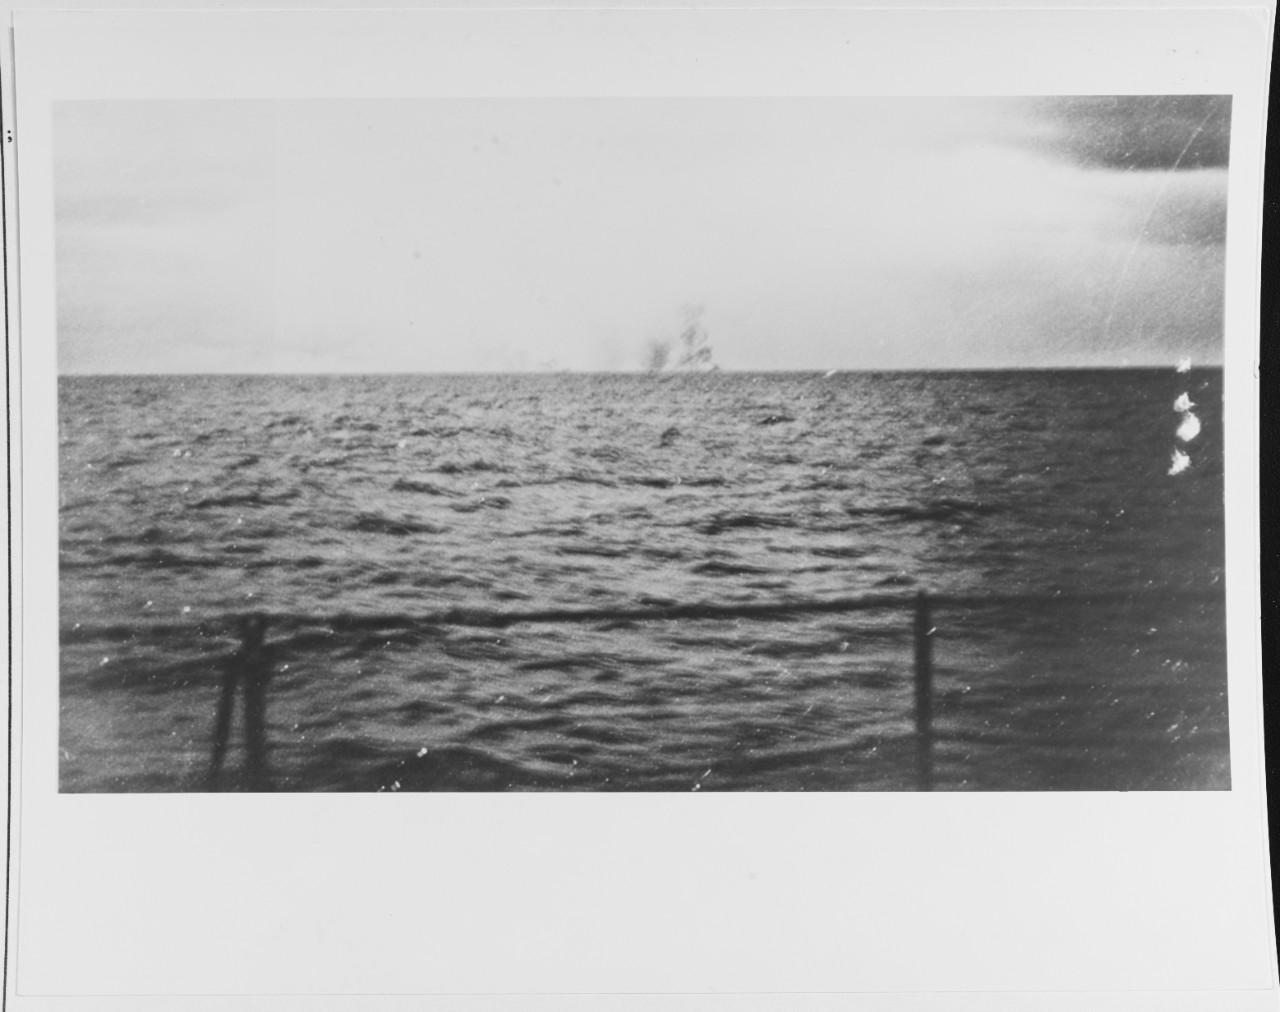 Photo #: NH 69724  Battle of the Denmark Strait, 24 May 1941